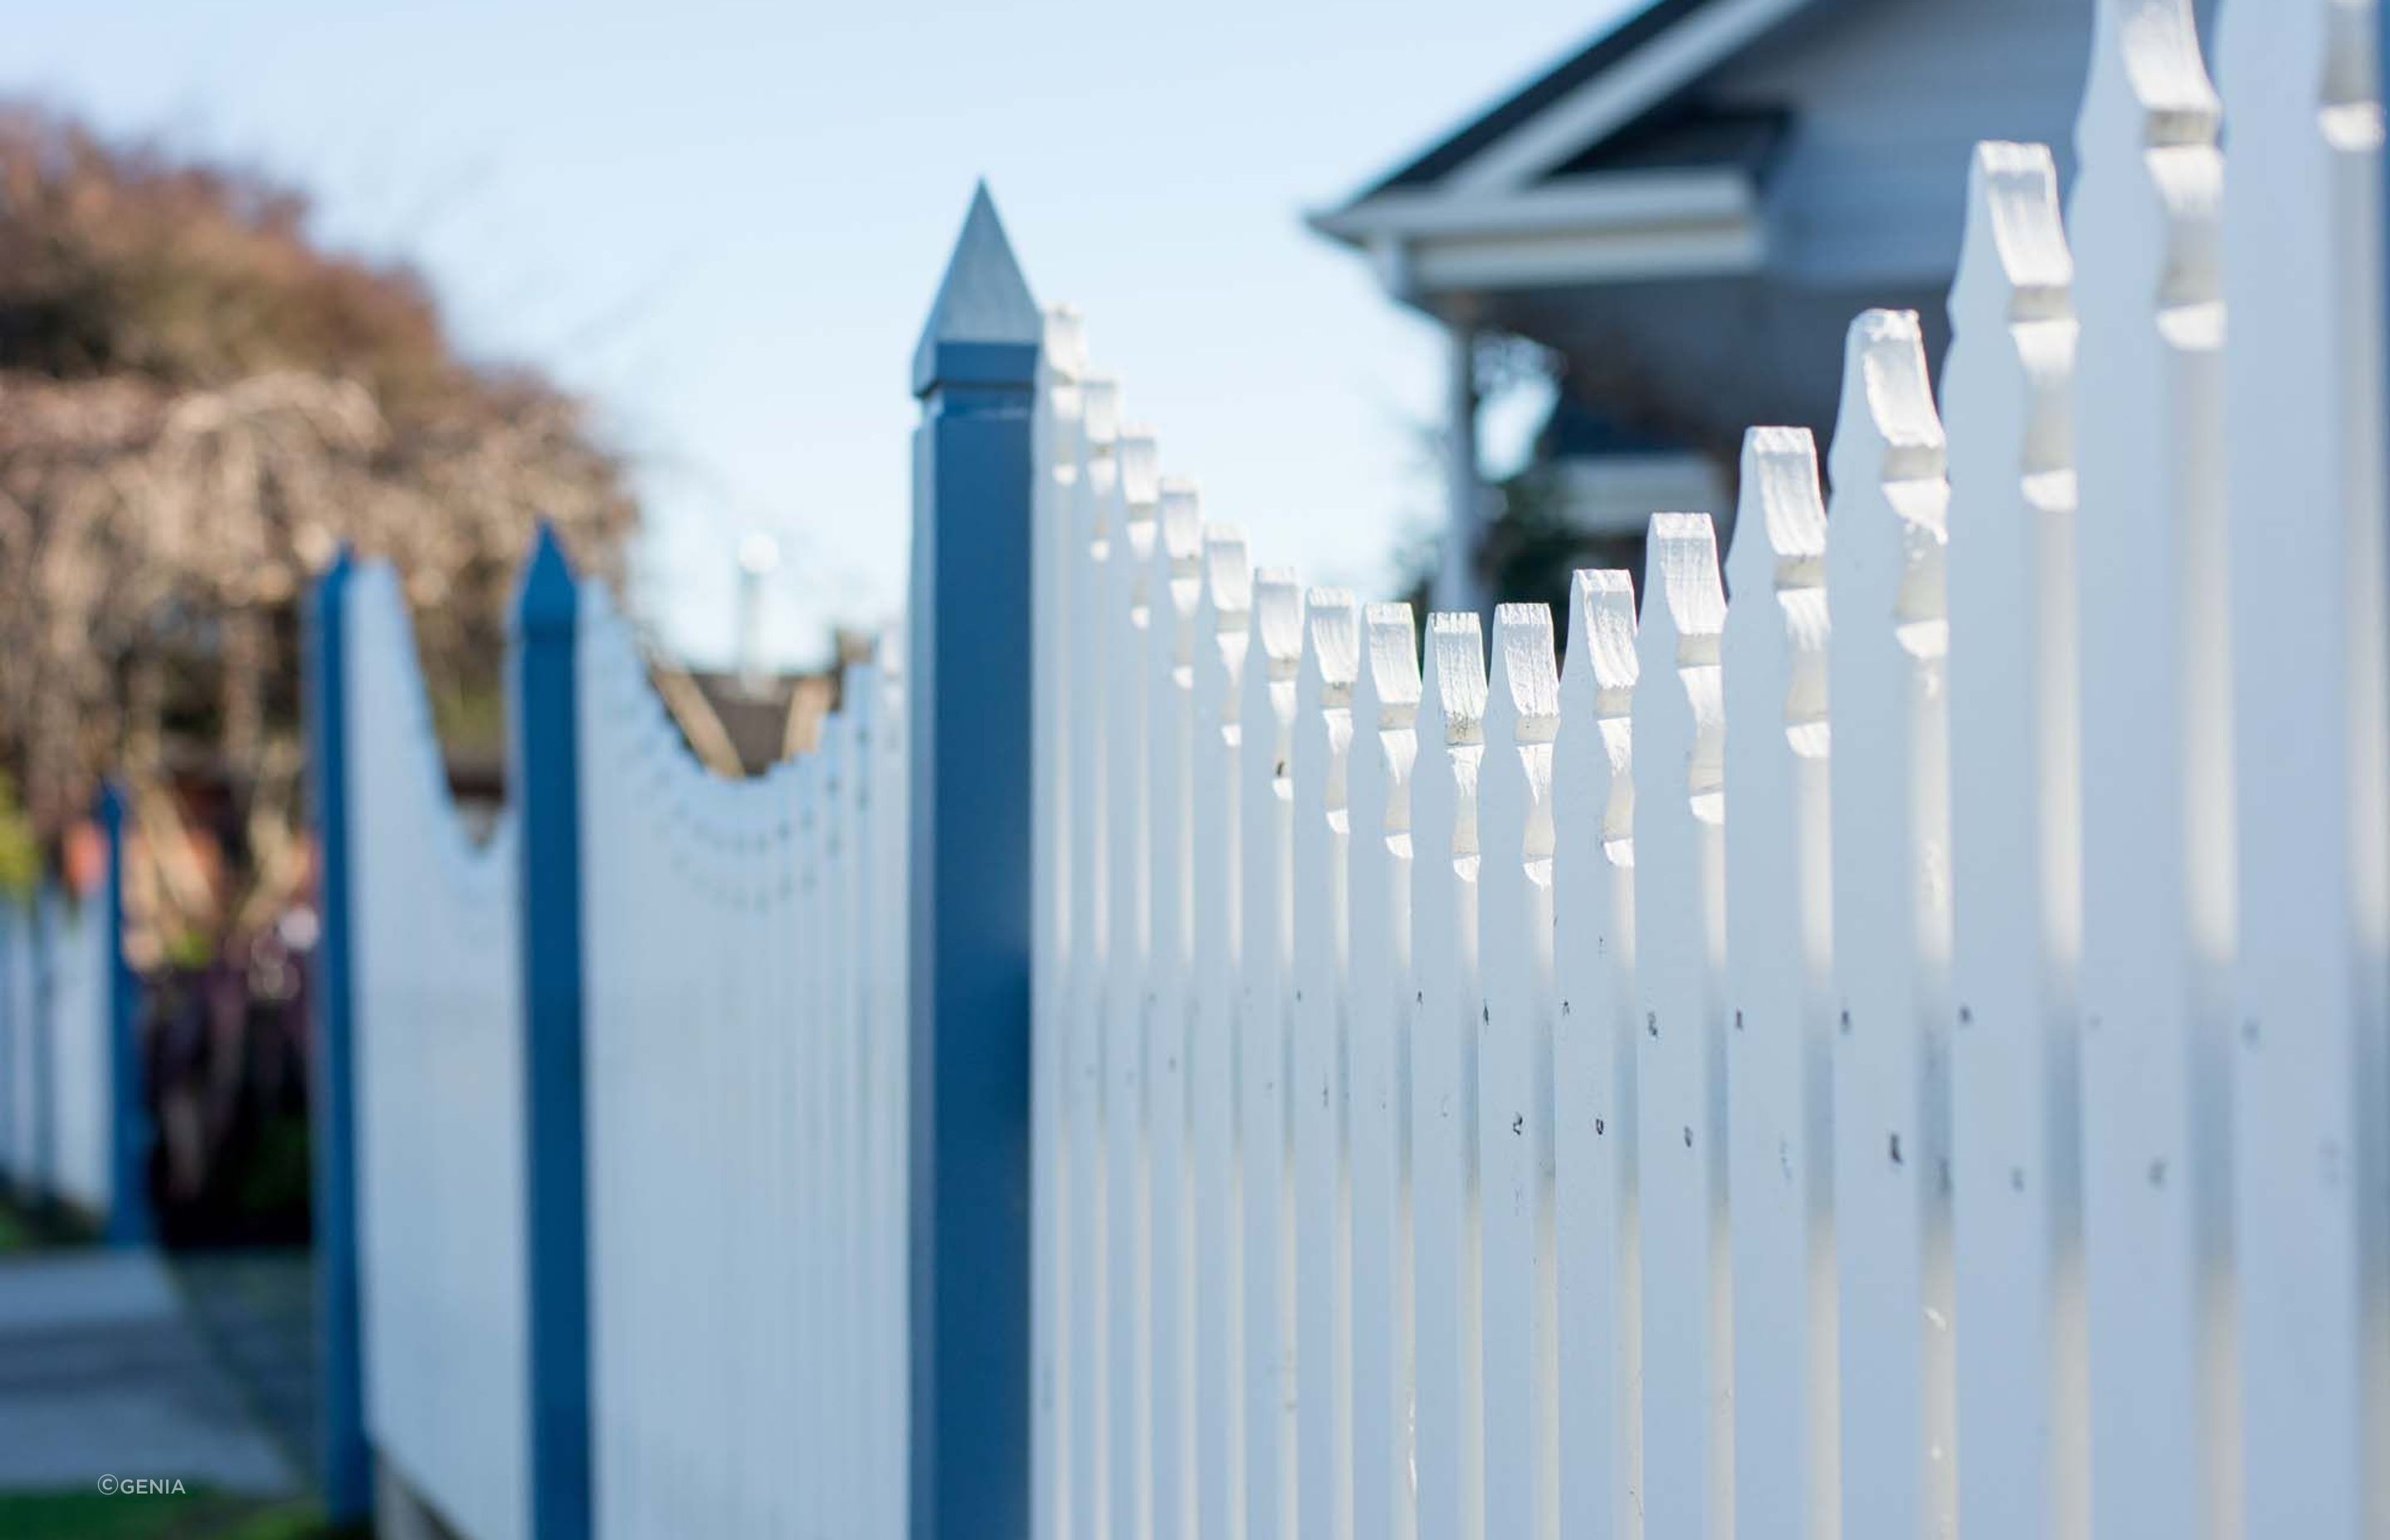 A great example of the iconic picket fence by MLC Group